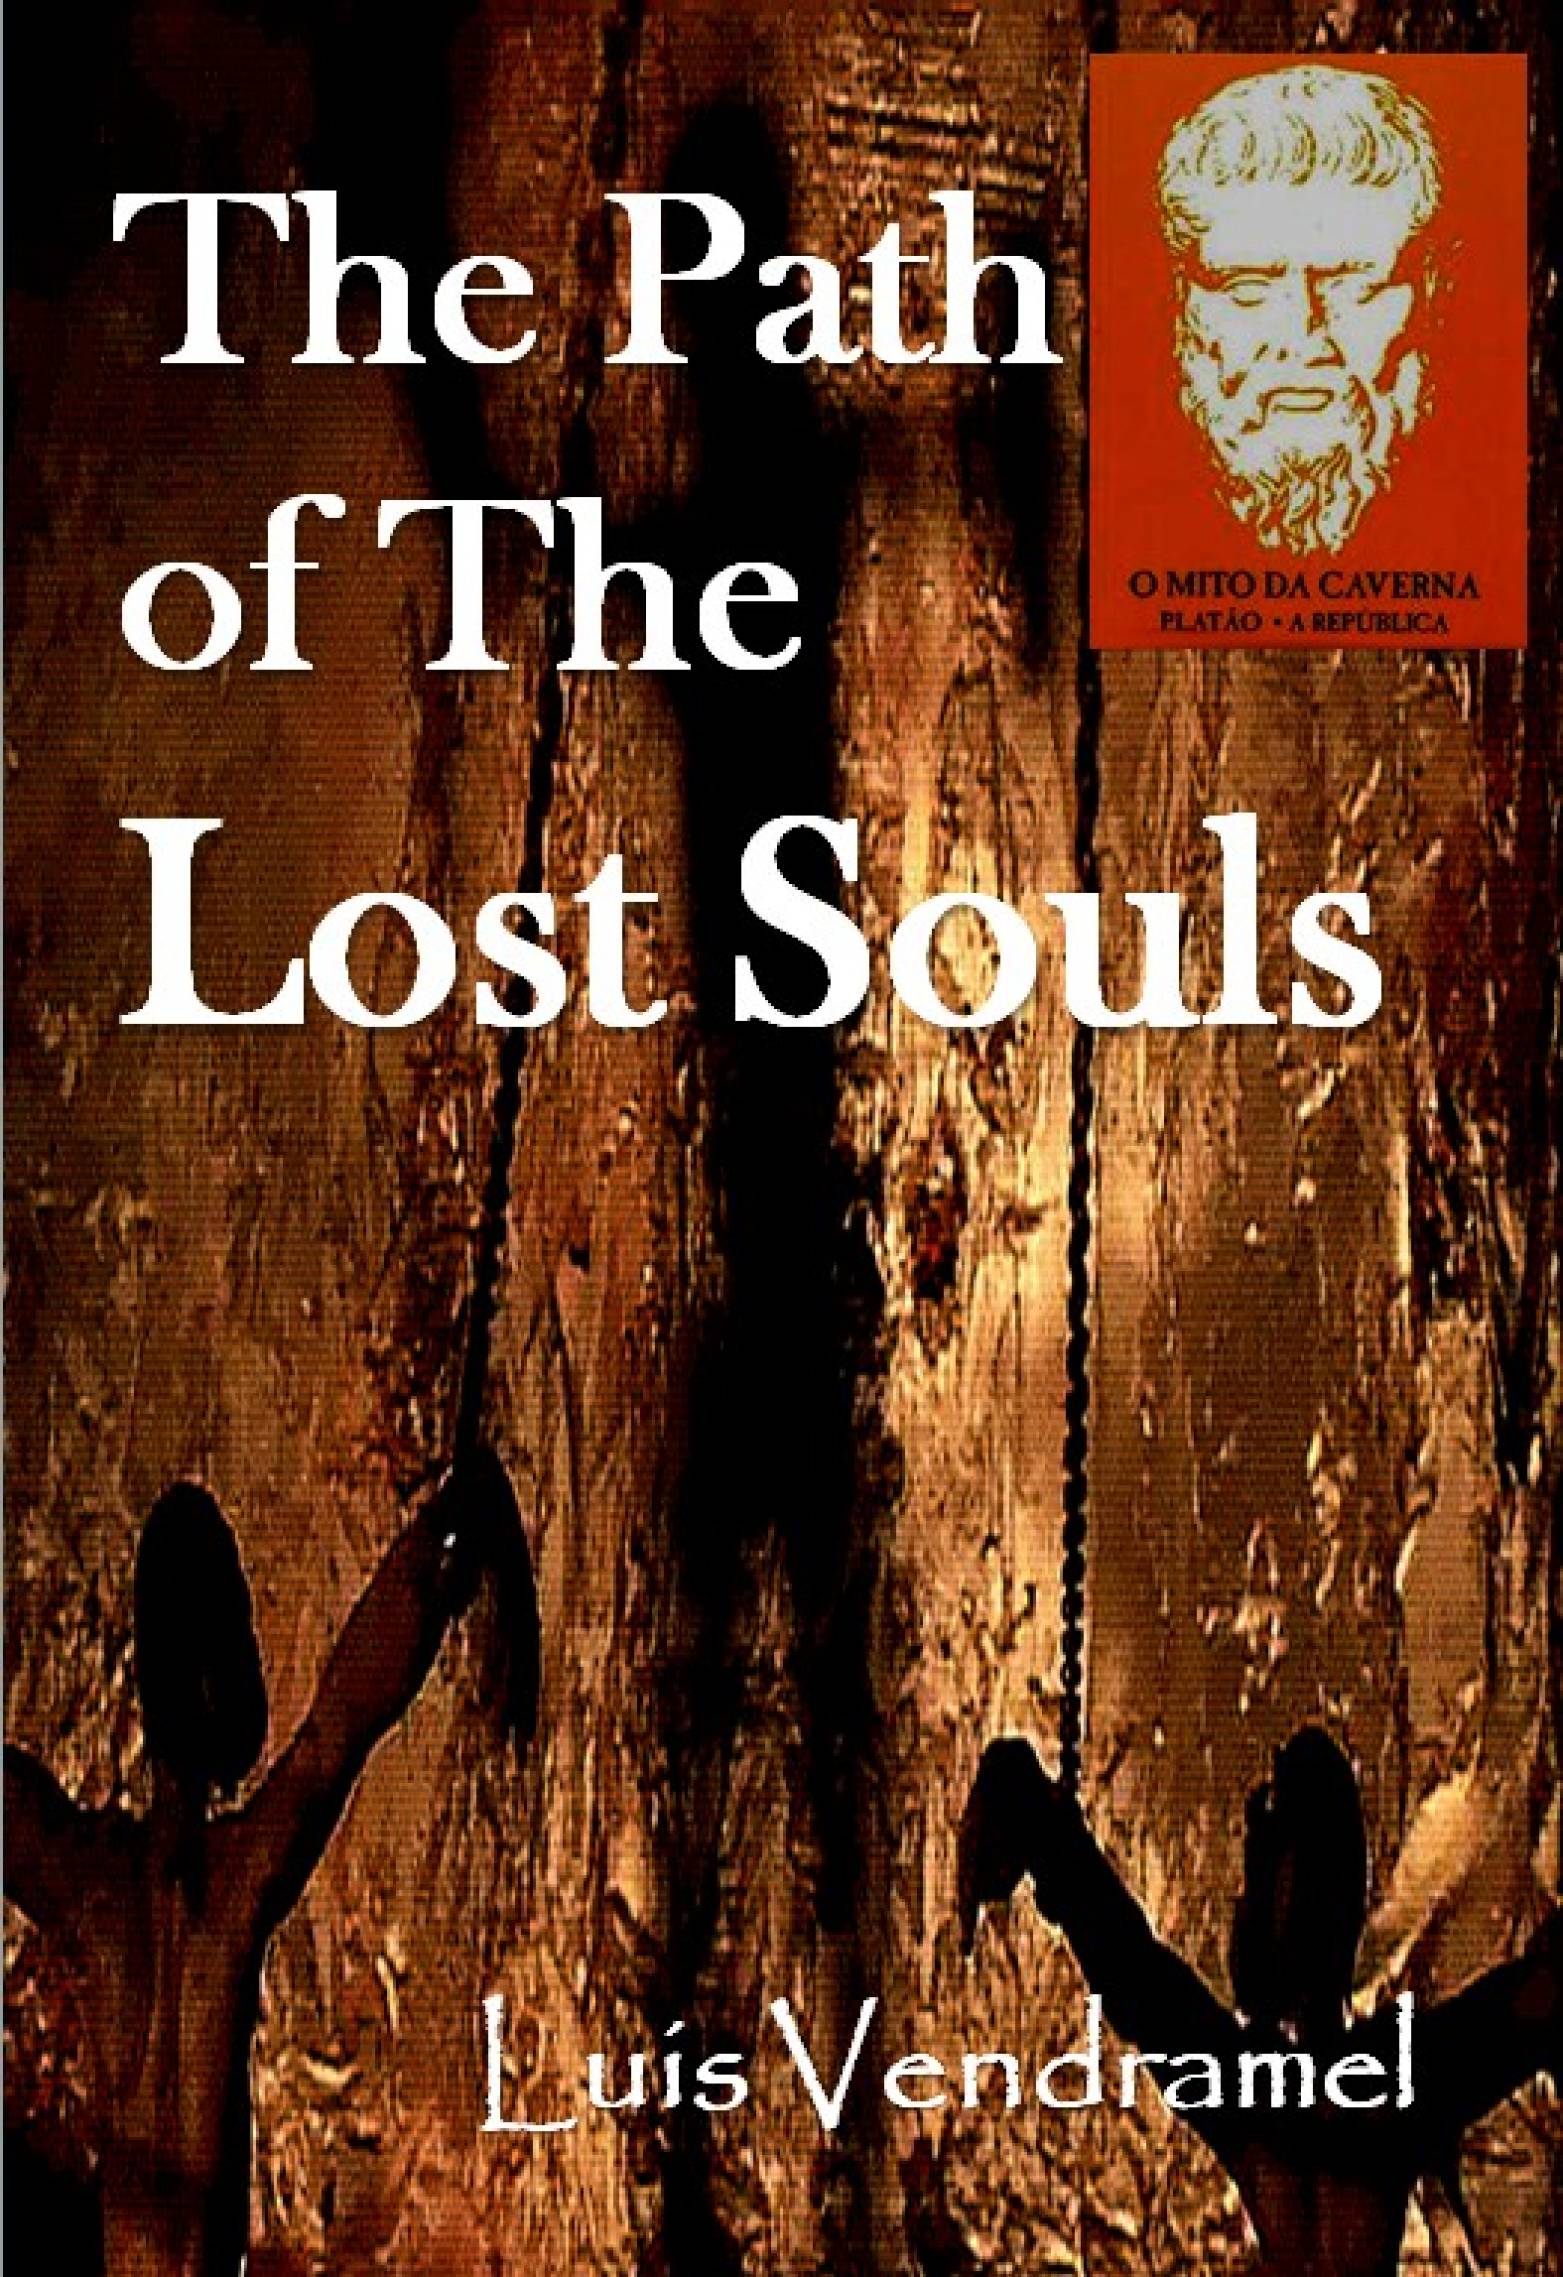 The Path of The Lost Souls by Luis Vendramel (ebook)